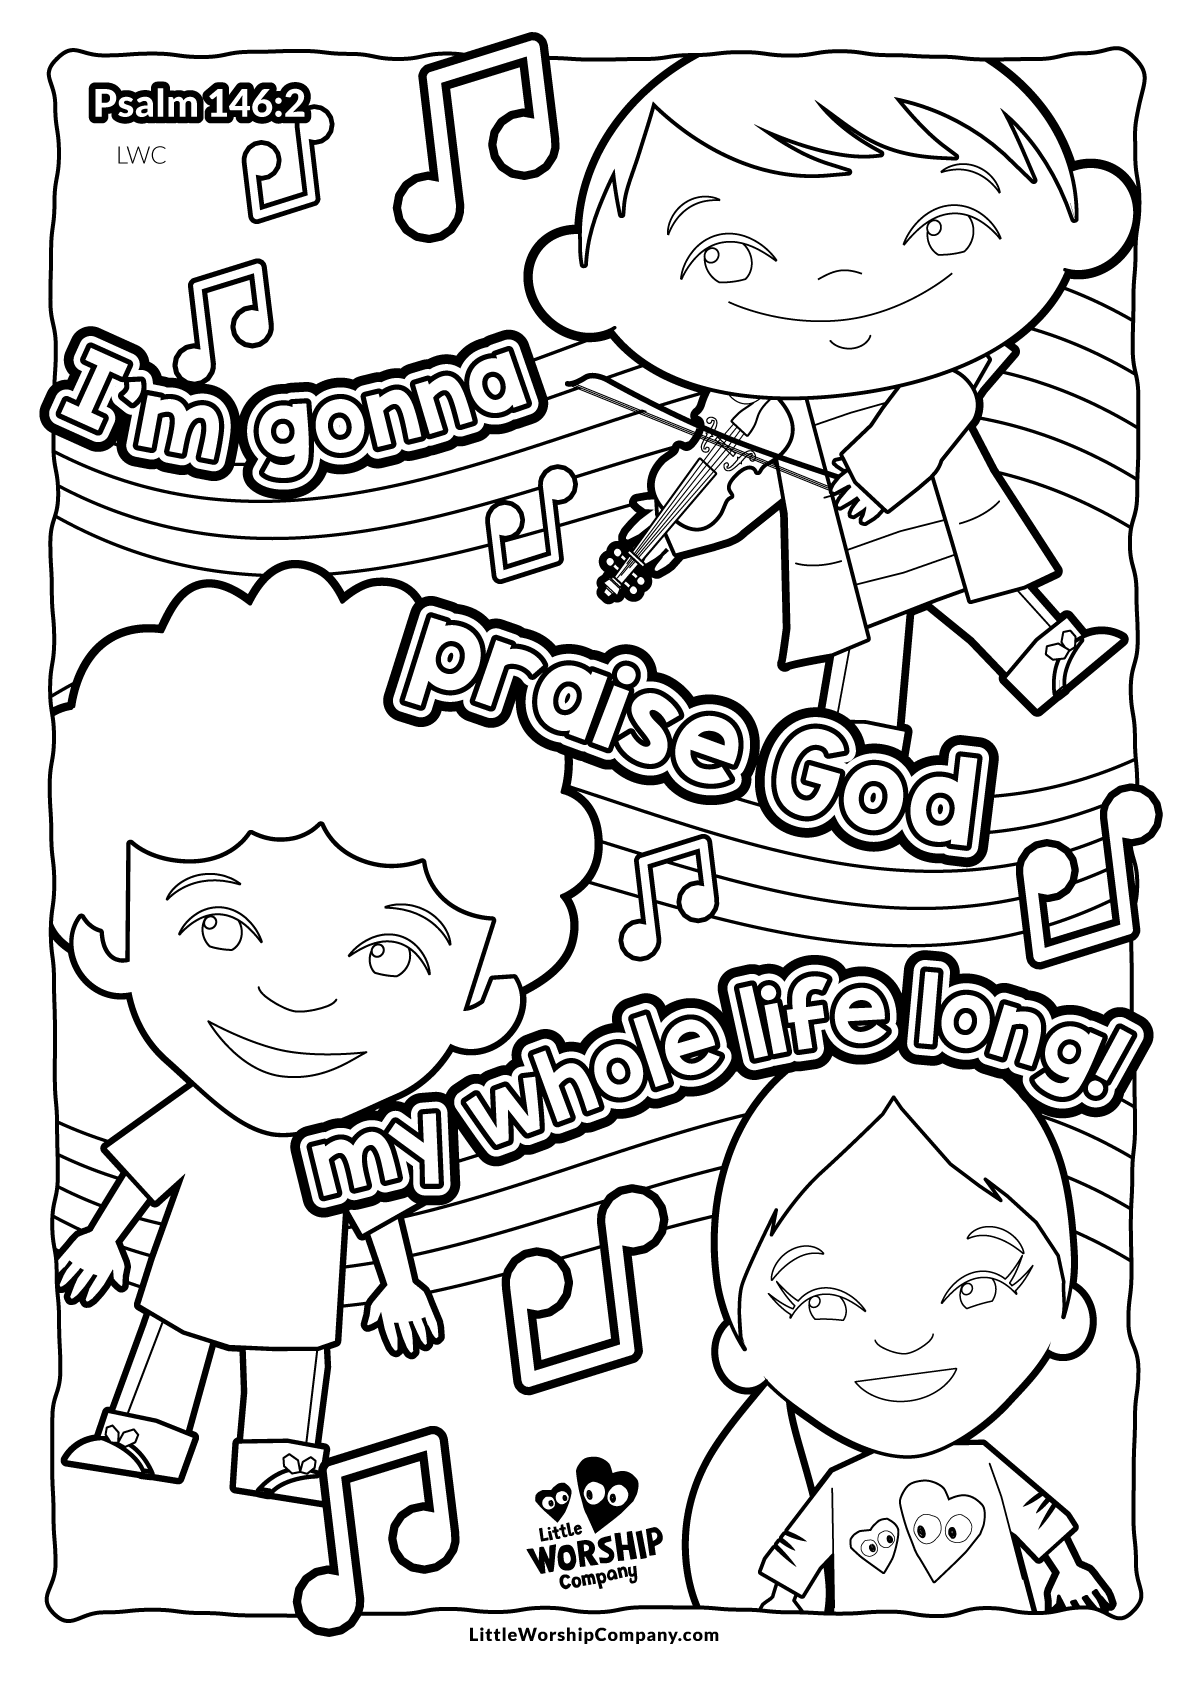 Little Worship Company: colouring books ...